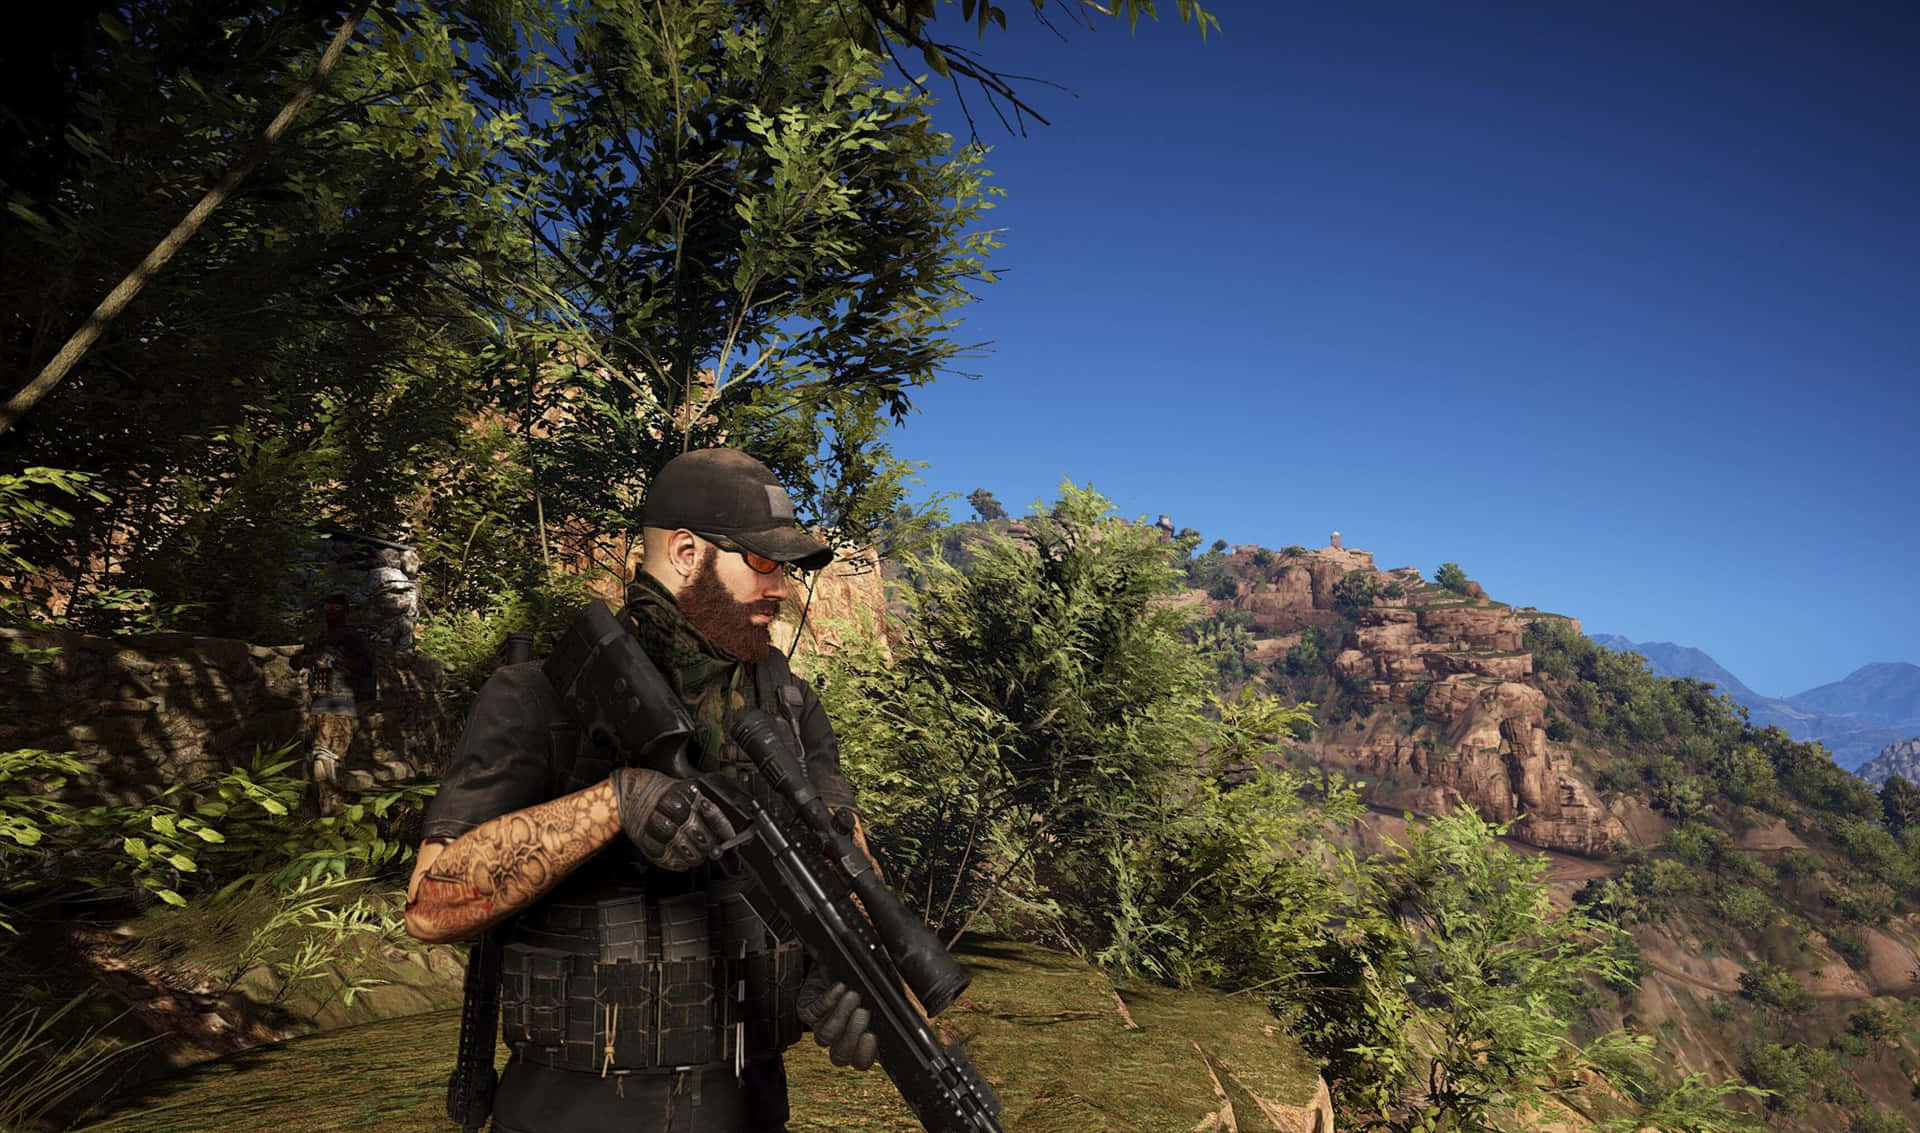 Get Ready for Battle: Ghost Recon Wildlands